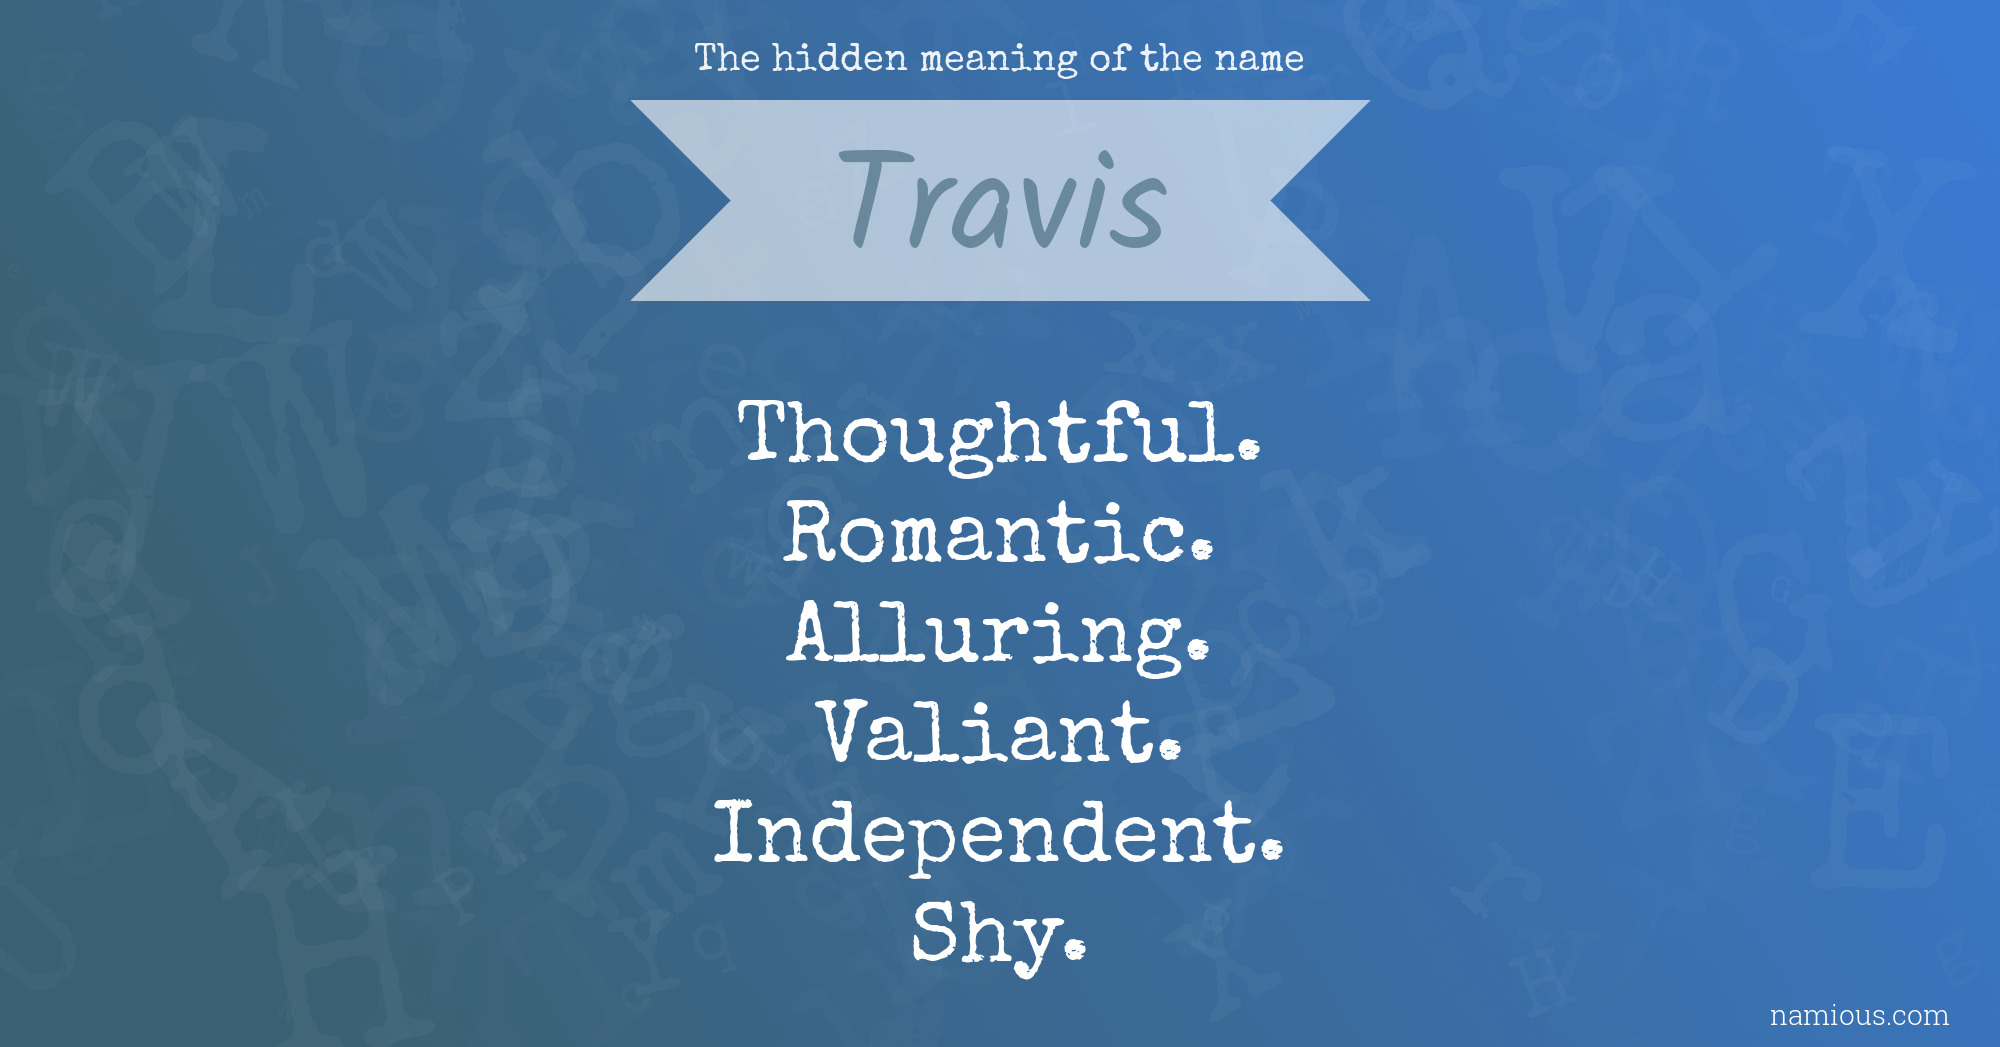 The hidden meaning of the name Travis